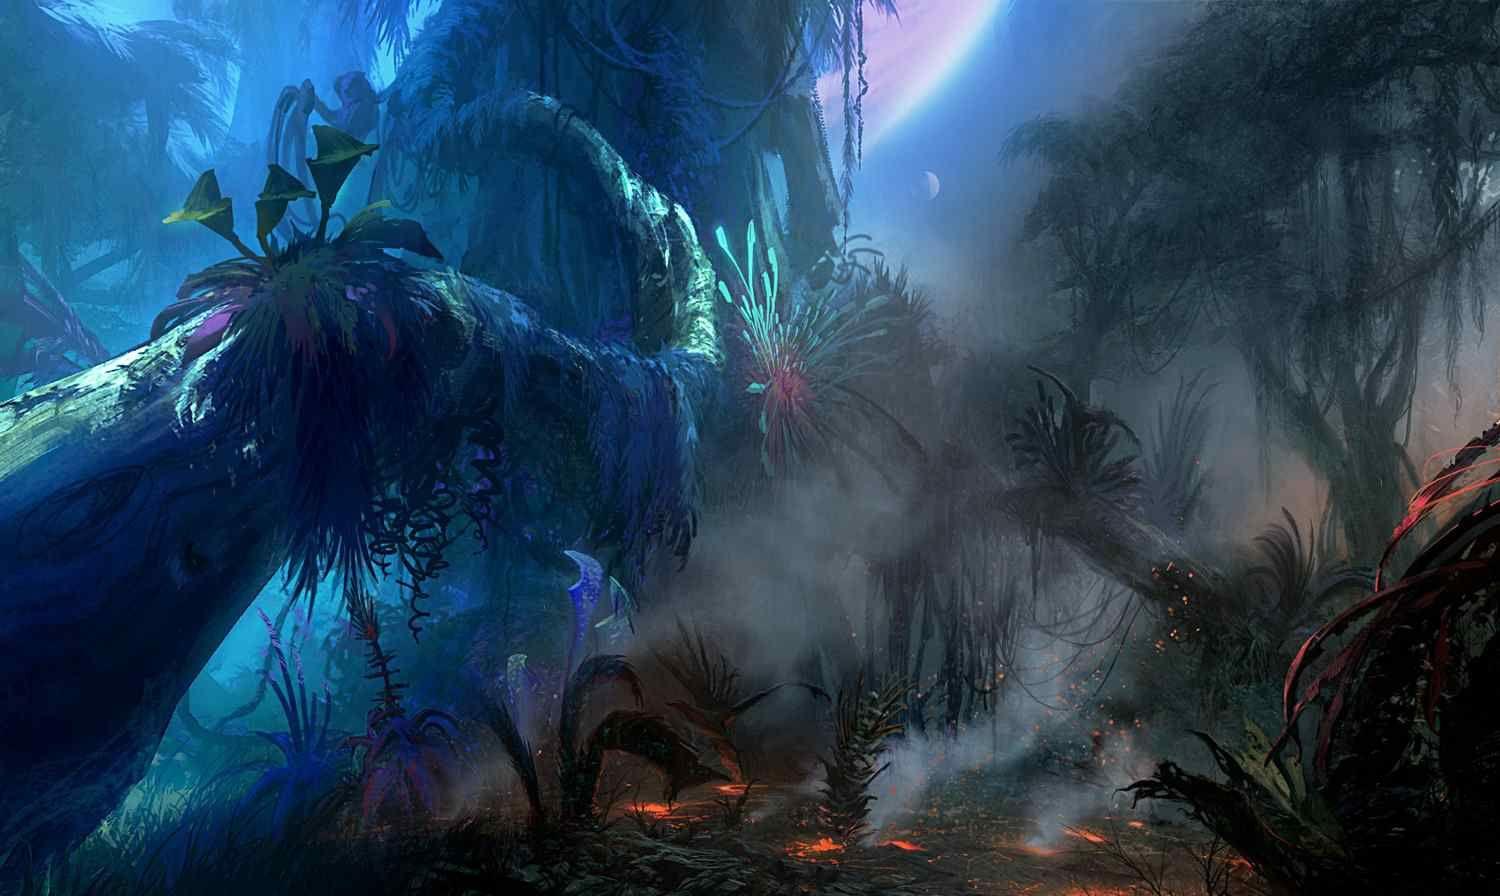 mystic forest. NEW AGE. Avatar movie, Fantasy landscape